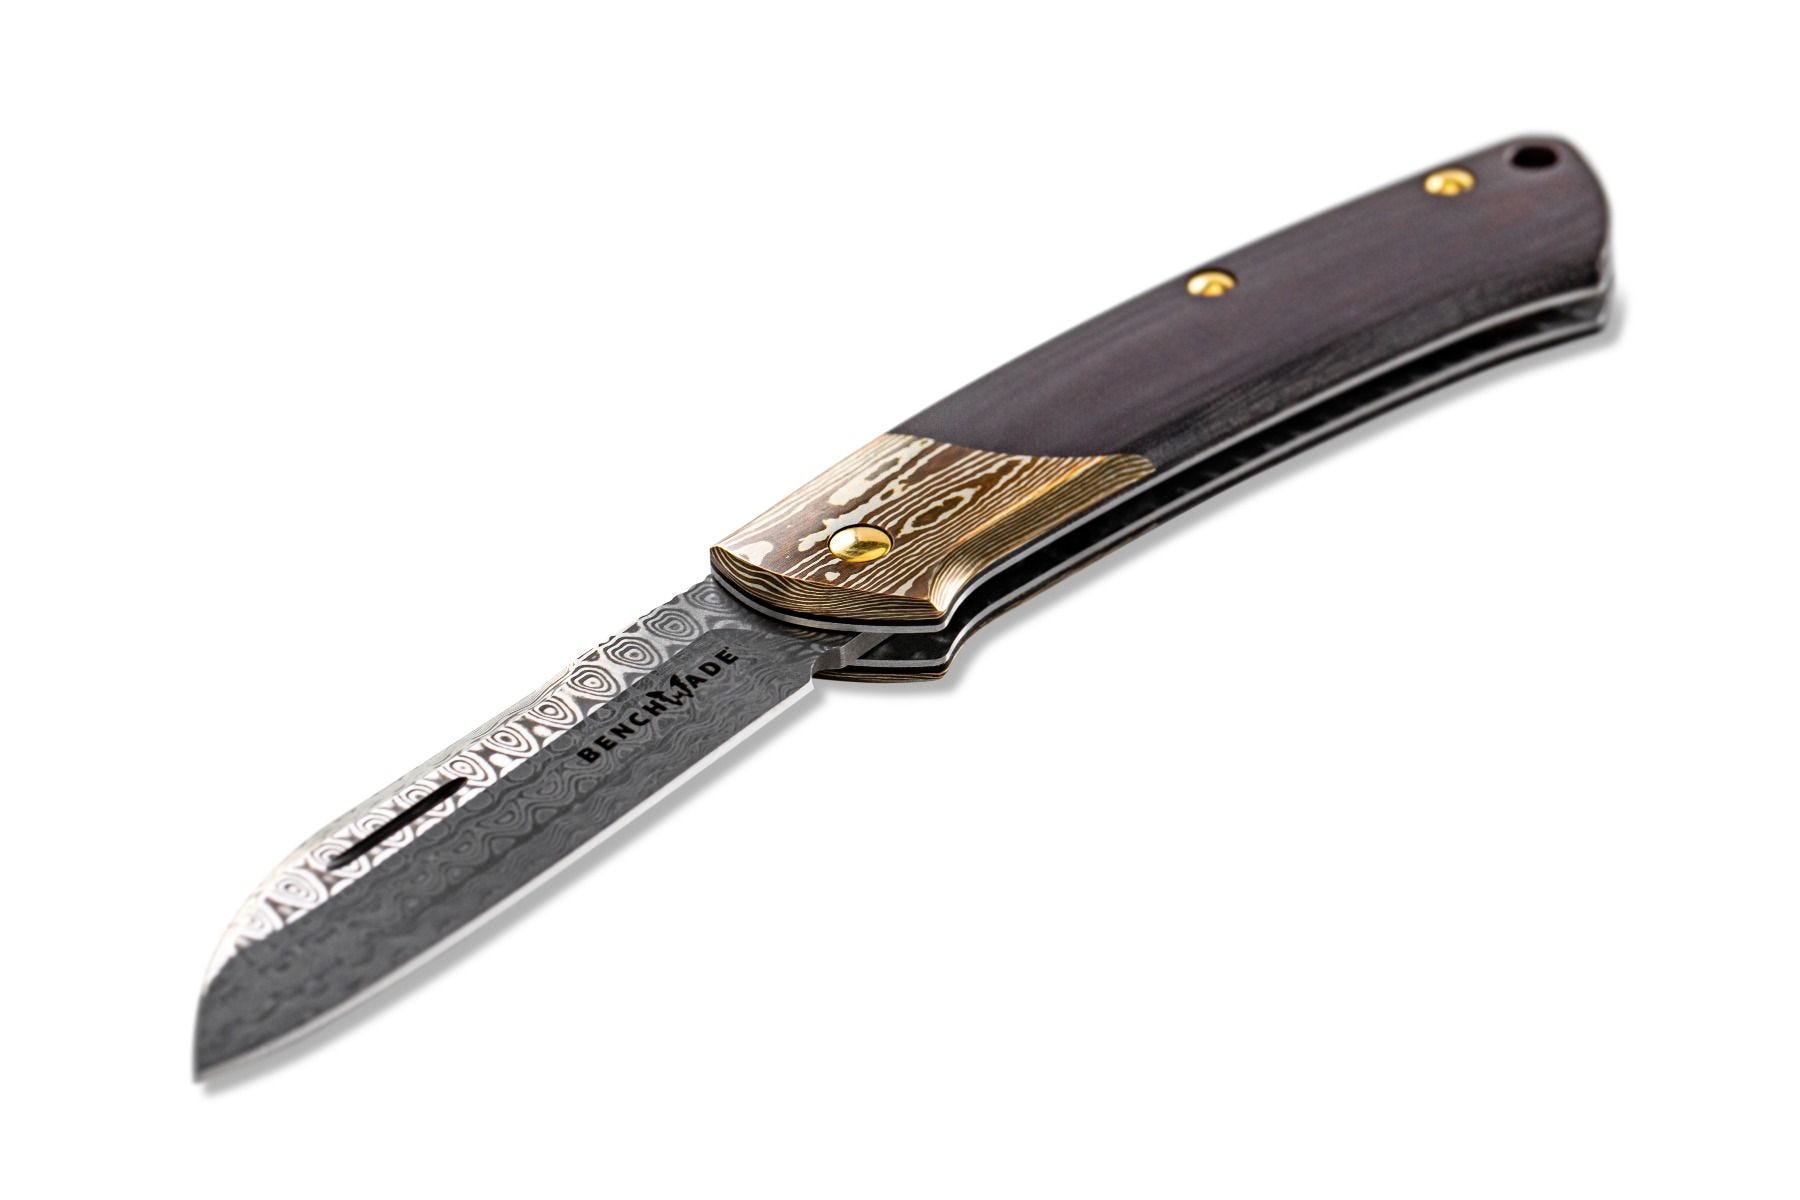 Benchmade Damascus Steel And Gold Proper Is A Premium Gentlemans 